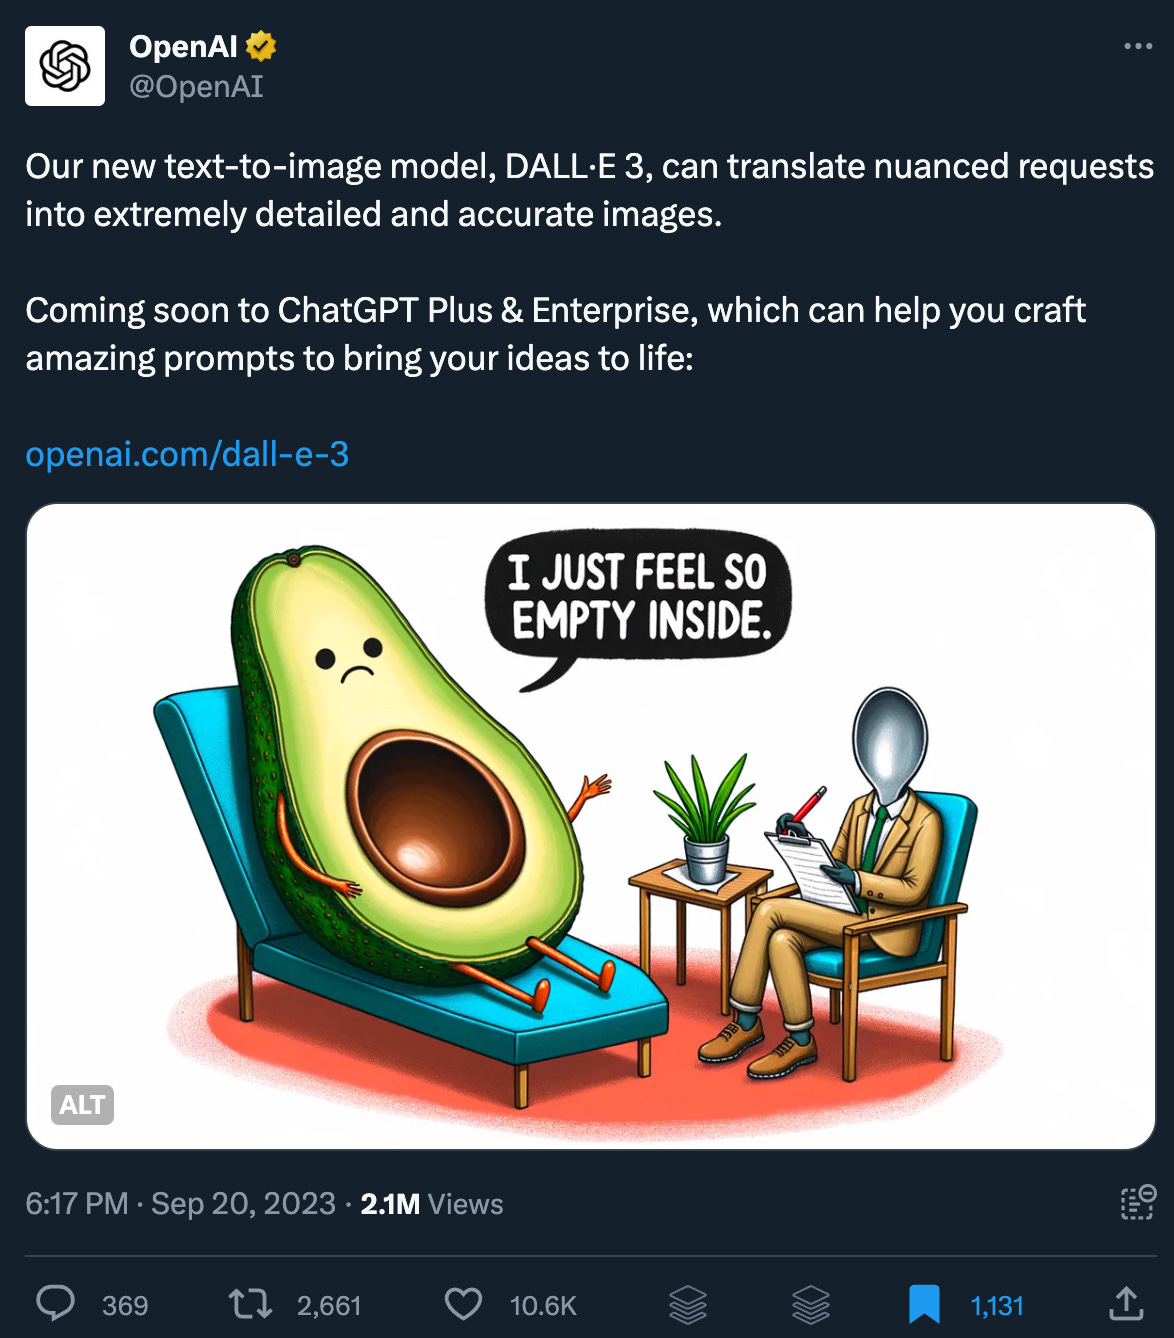 OpenAI's announcement of DALL-E 3 and its coming integration with ChatGPT